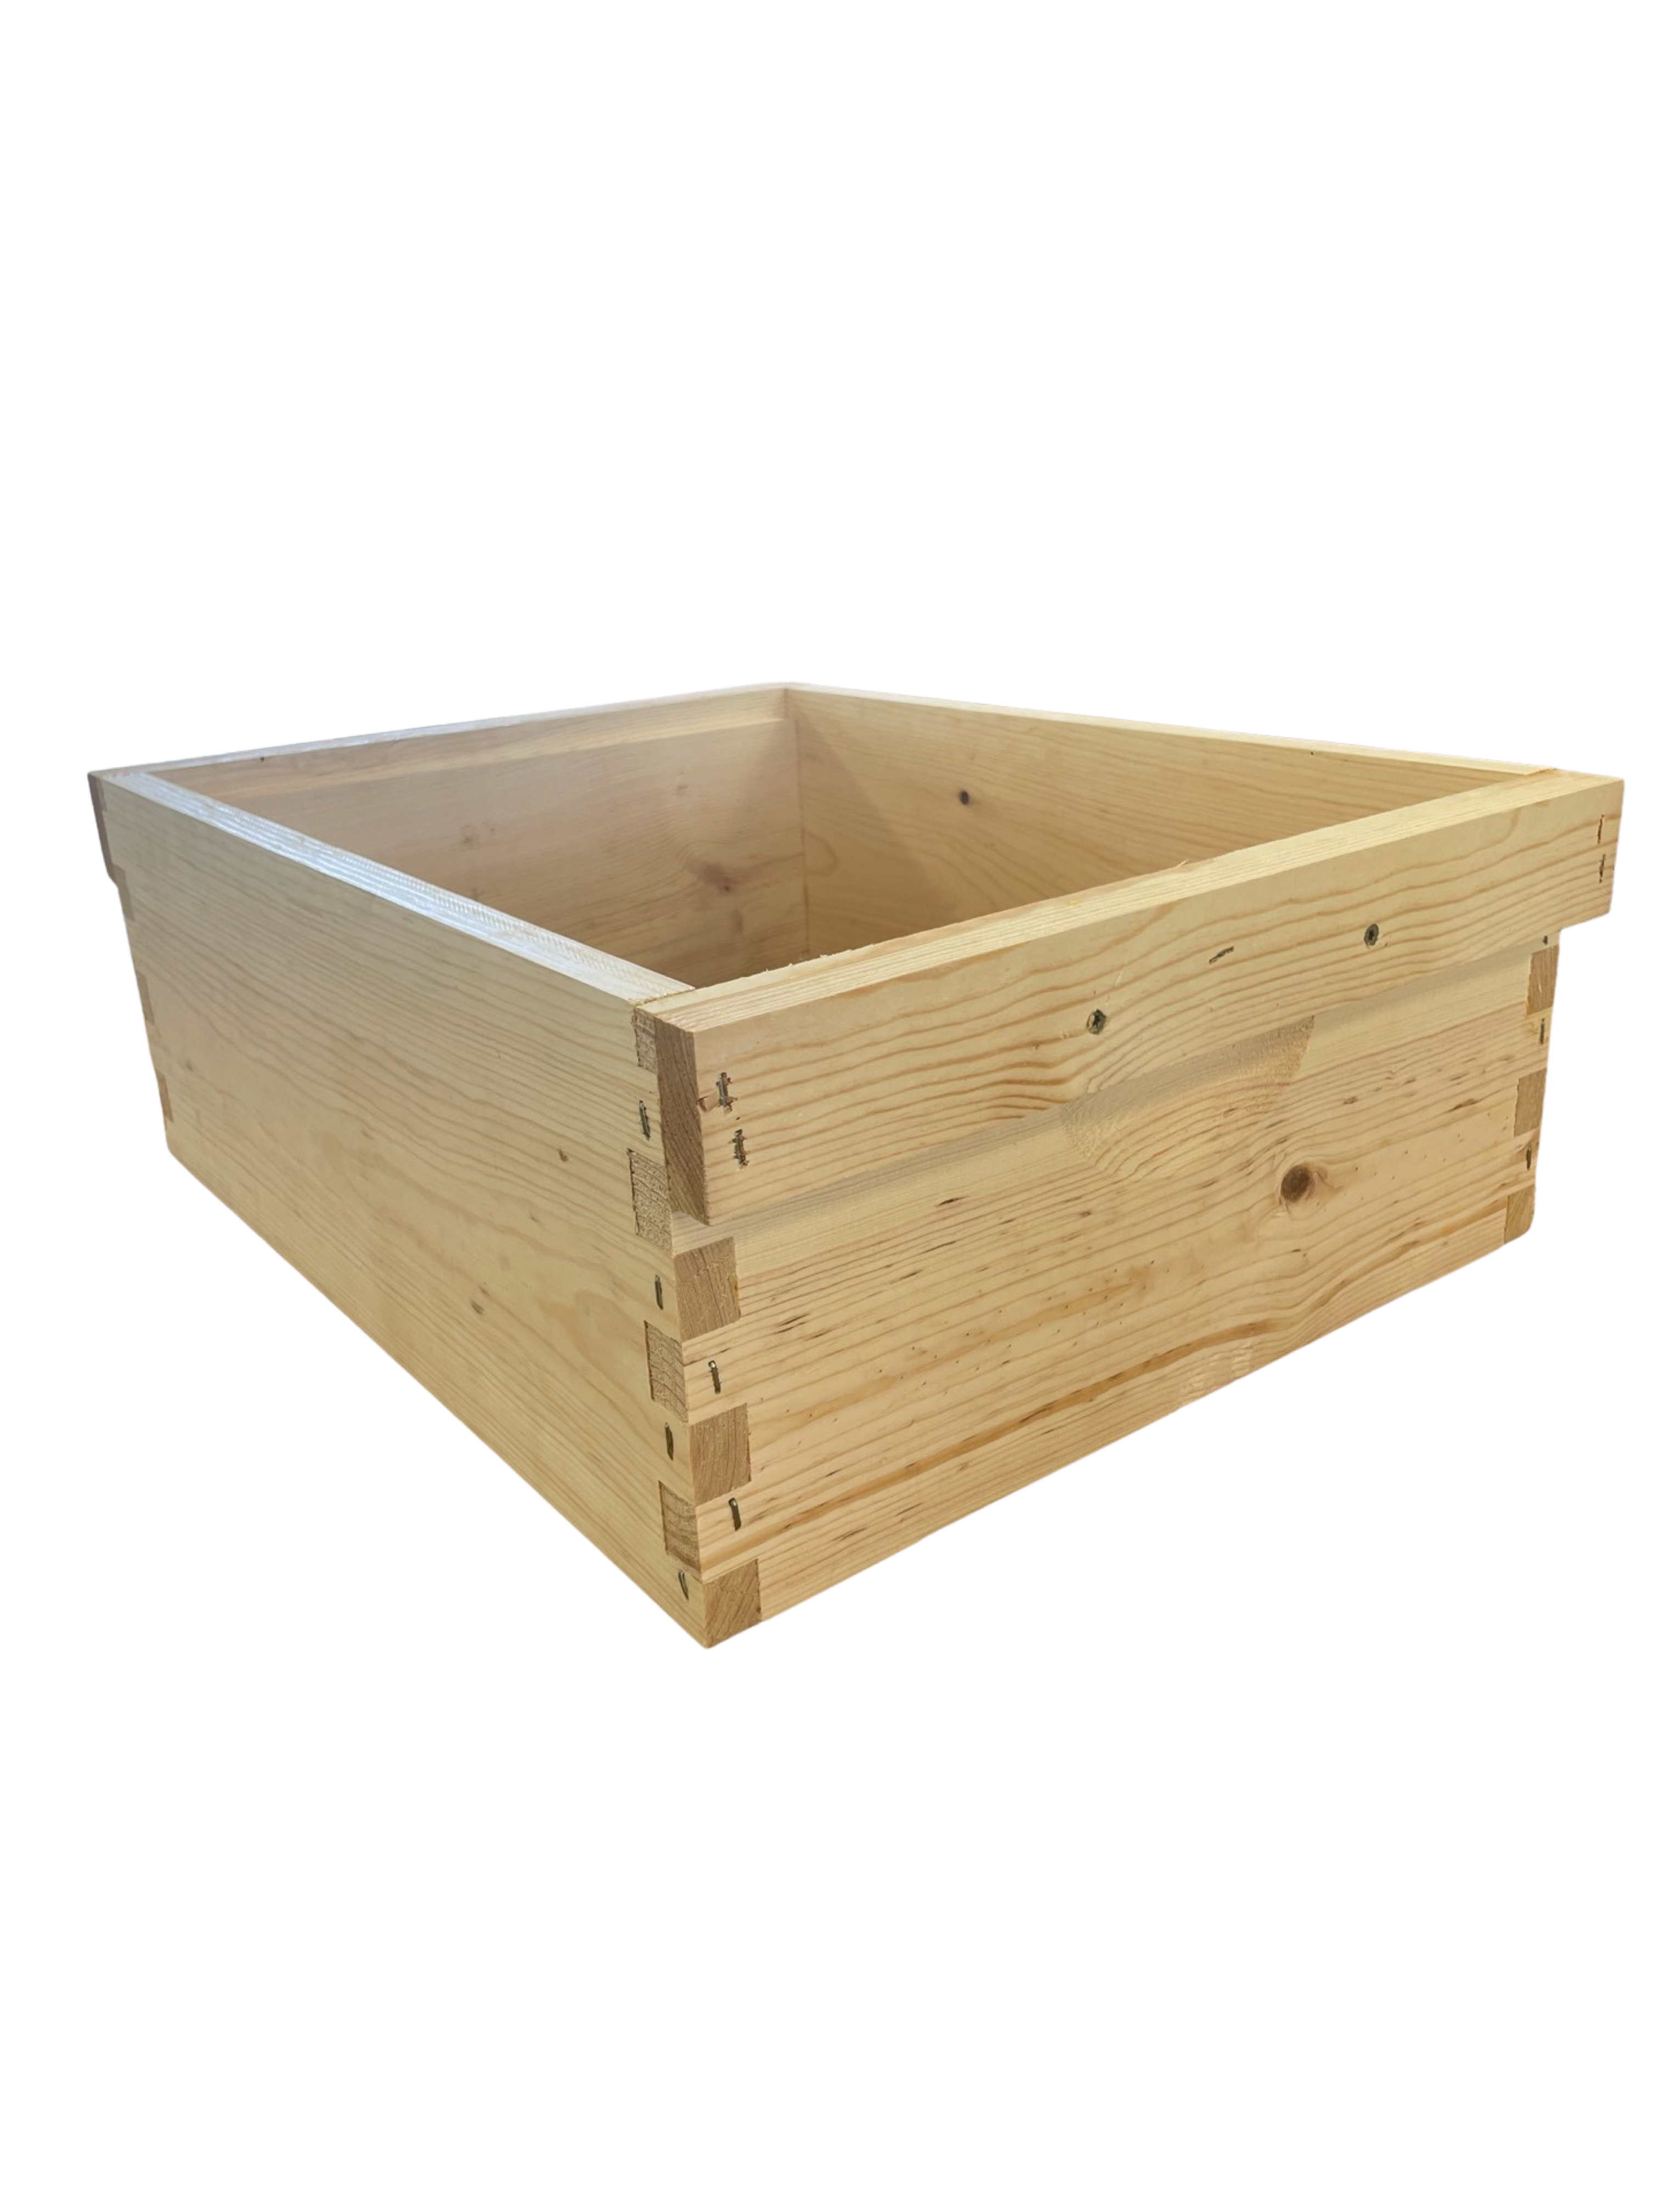 Shallow (6 5/8") Hive Box | Cleated | Treated